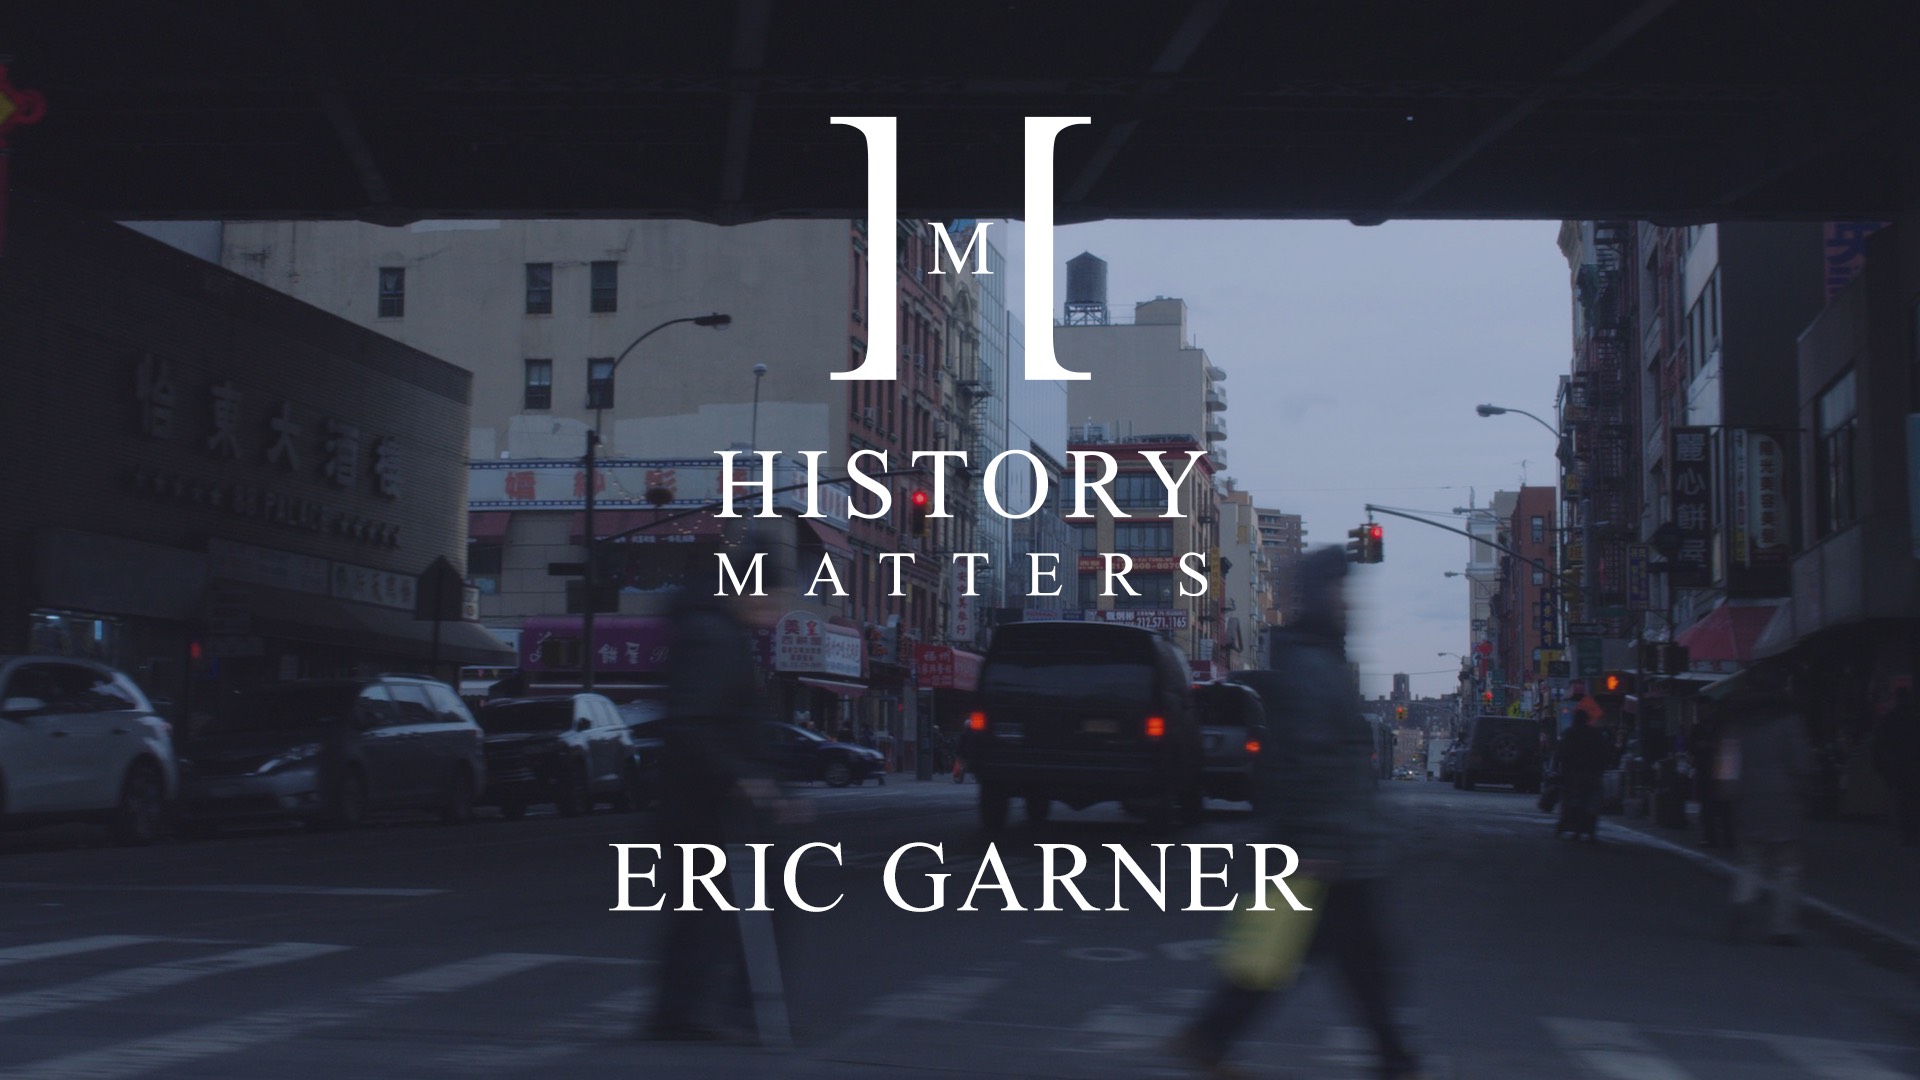 History Matters Eric Garner by Otis Miller with background of city with cars and people